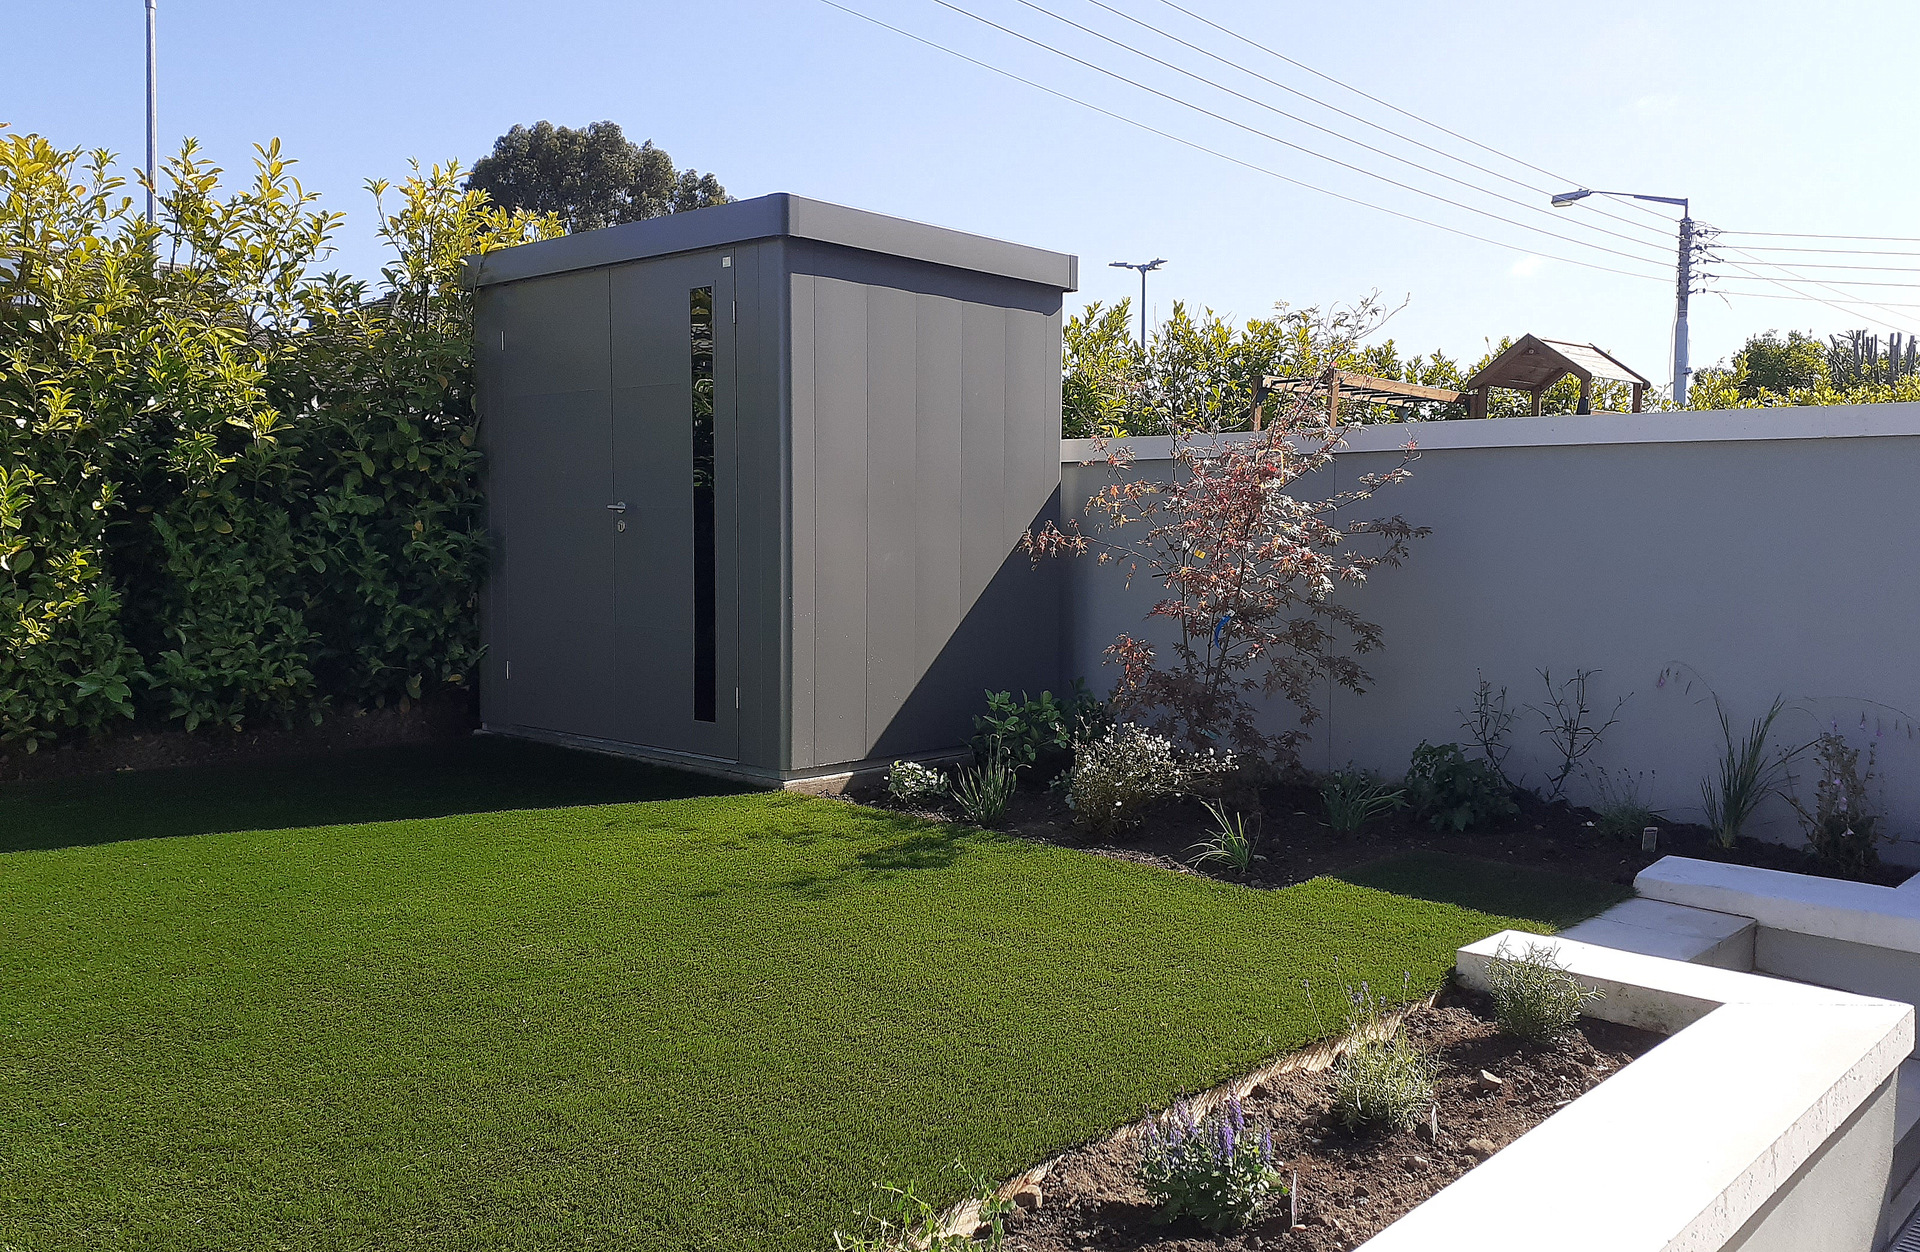 Biohort Neo Garden Shed, Size 1B in metallic quartz grey - supplied + fitted in Killiney, Co Dublin by Owen Chubb Landscapers, Ireland's Premier Biohort Supplier and Trained & Certified Installation Partner.